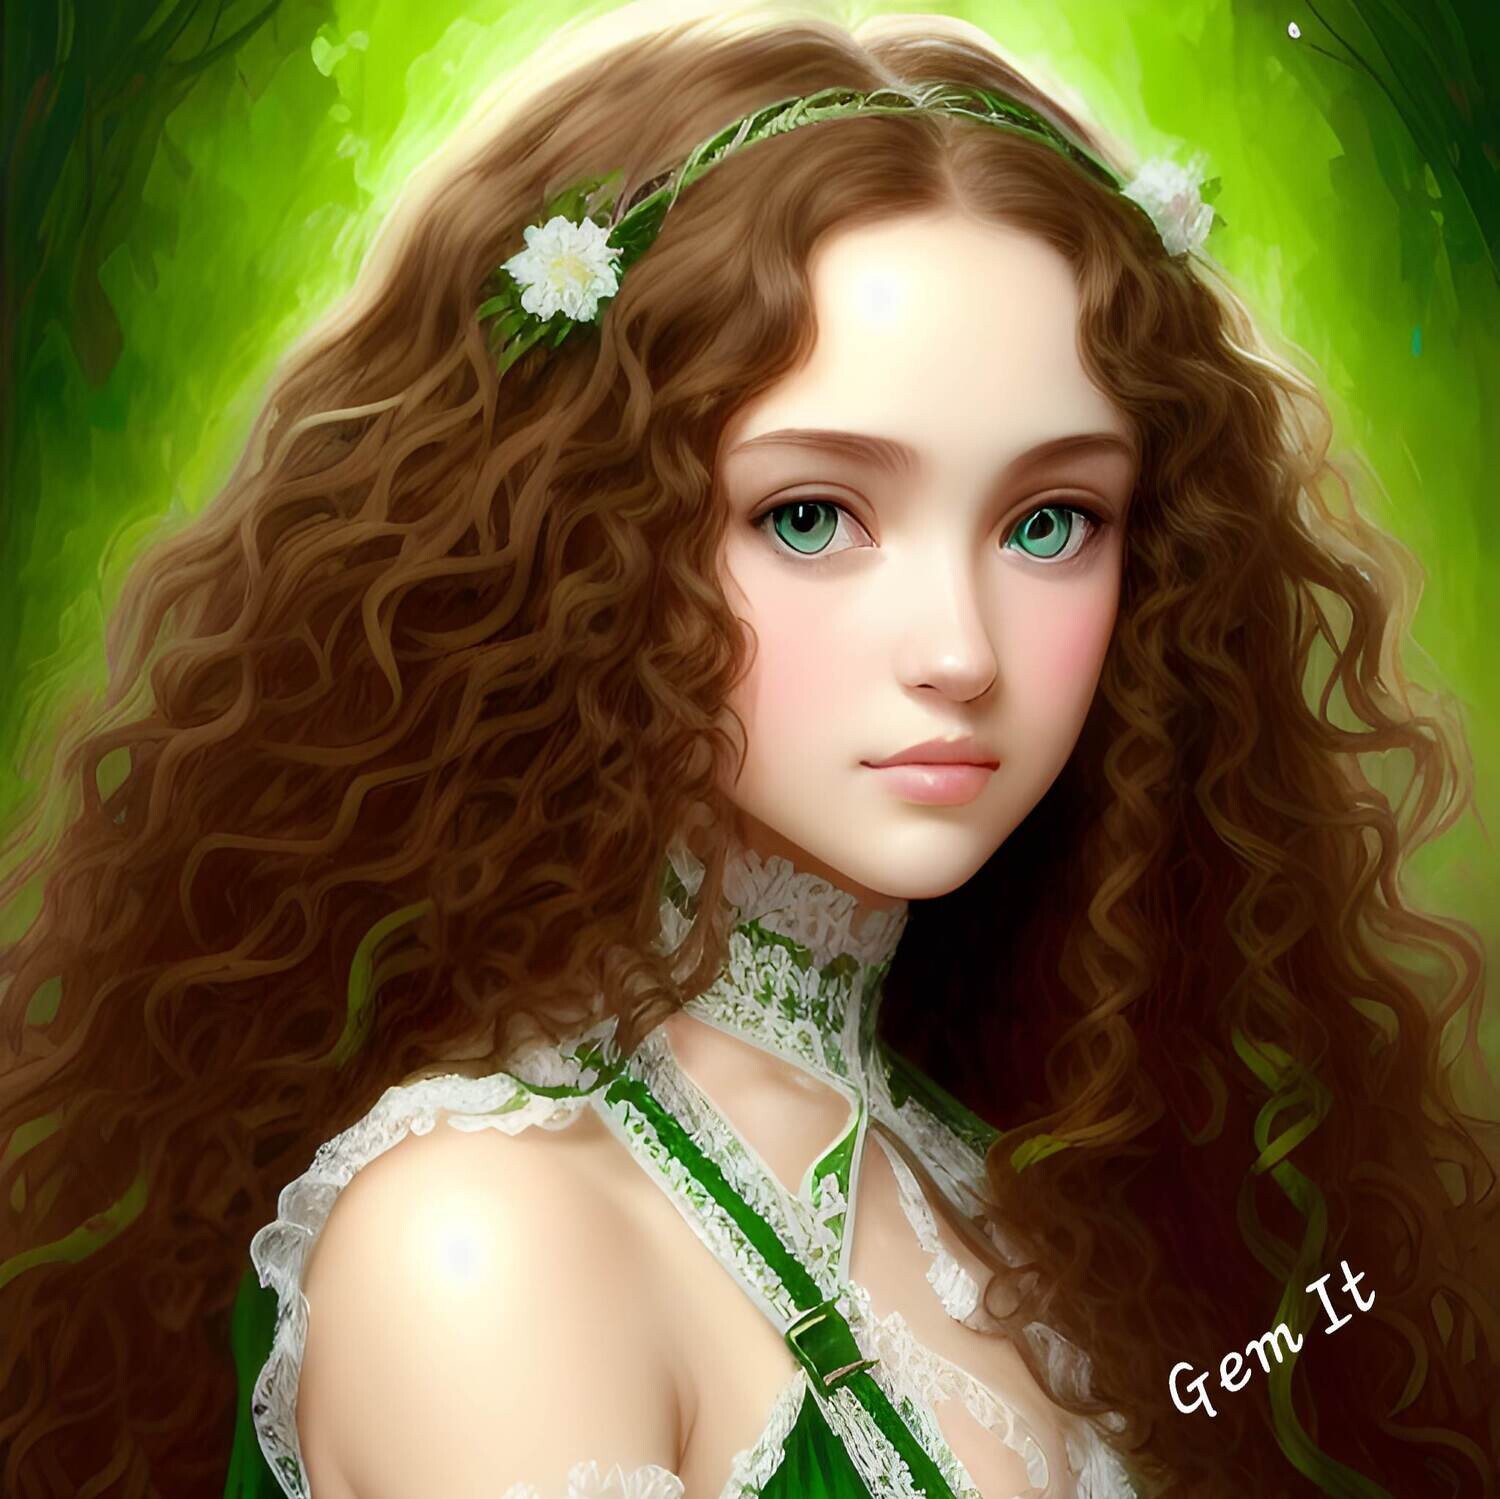 Curly Haired Girl 2 - Full Drill Diamond Painting - Specially ordered for you. Delivery is approximately 4 - 6 weeks.